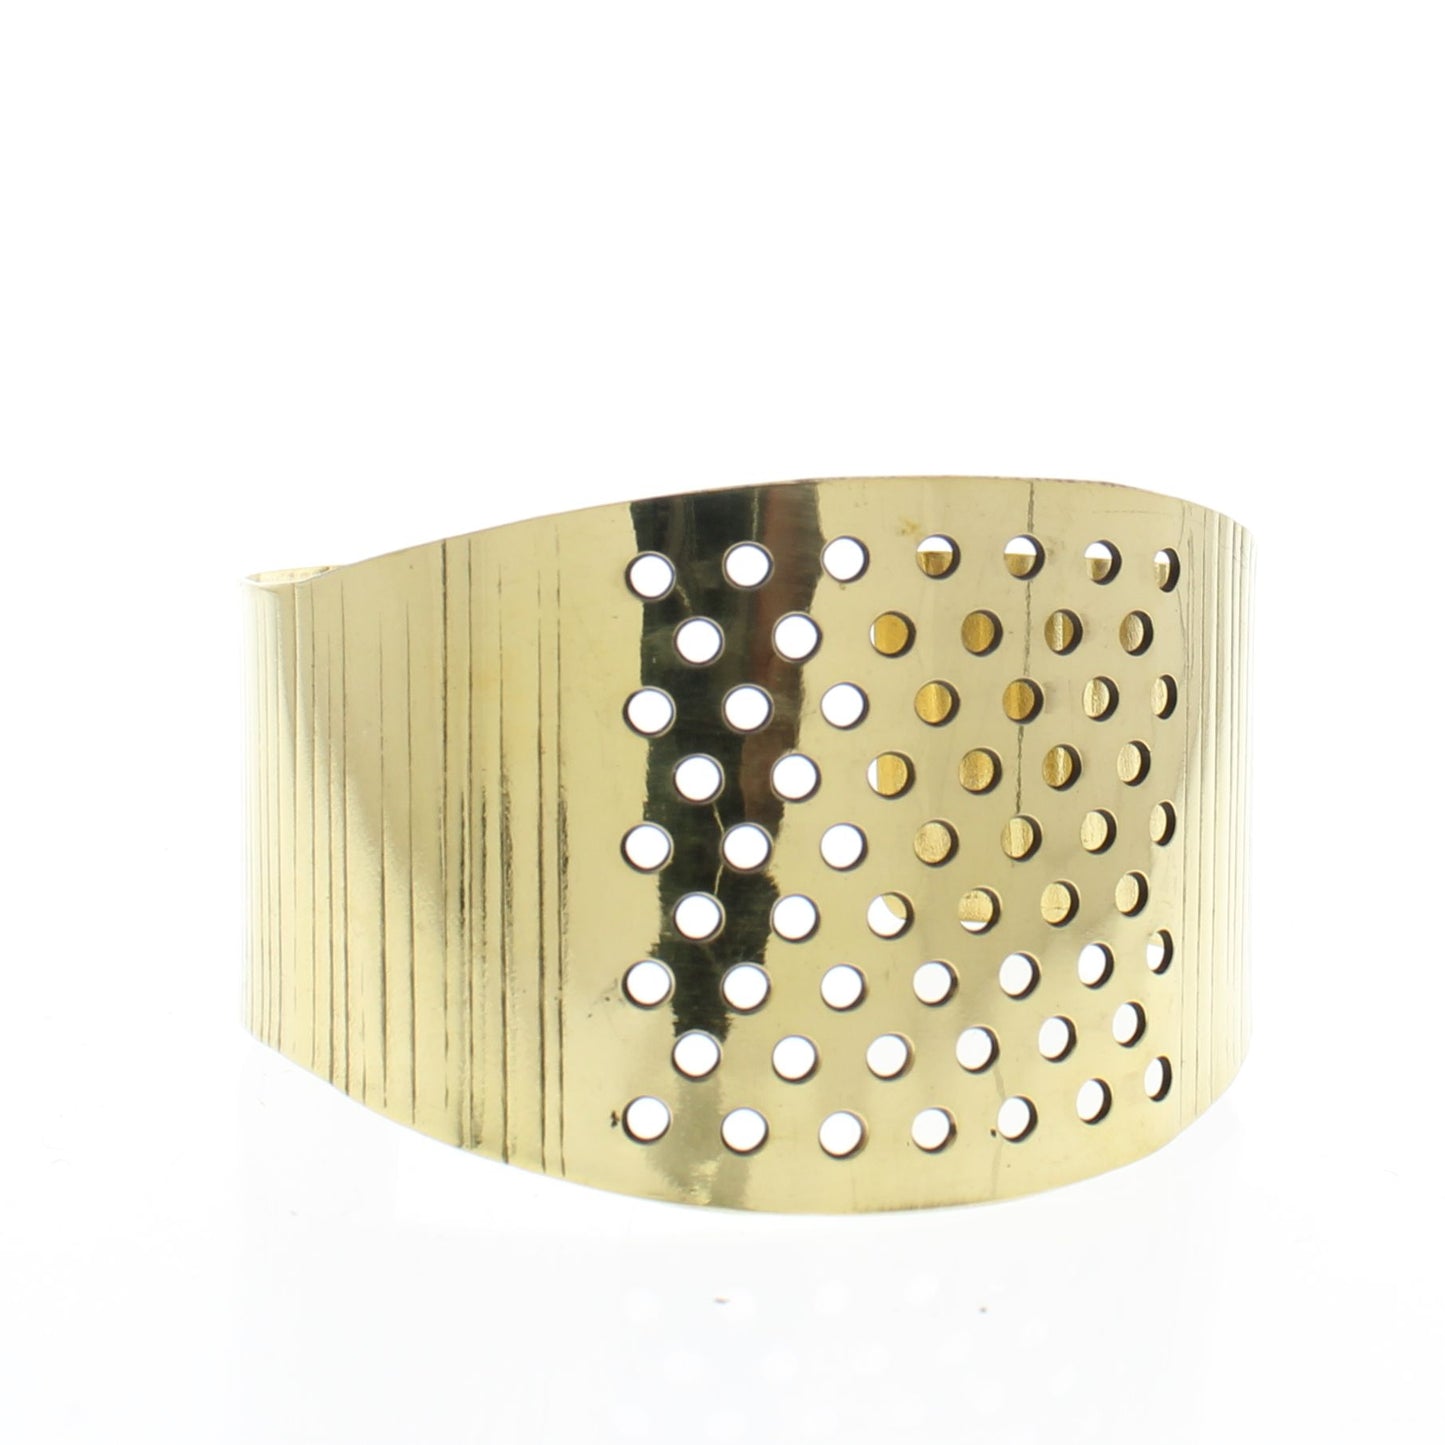 Brass Polish Cuff with pin holes, each